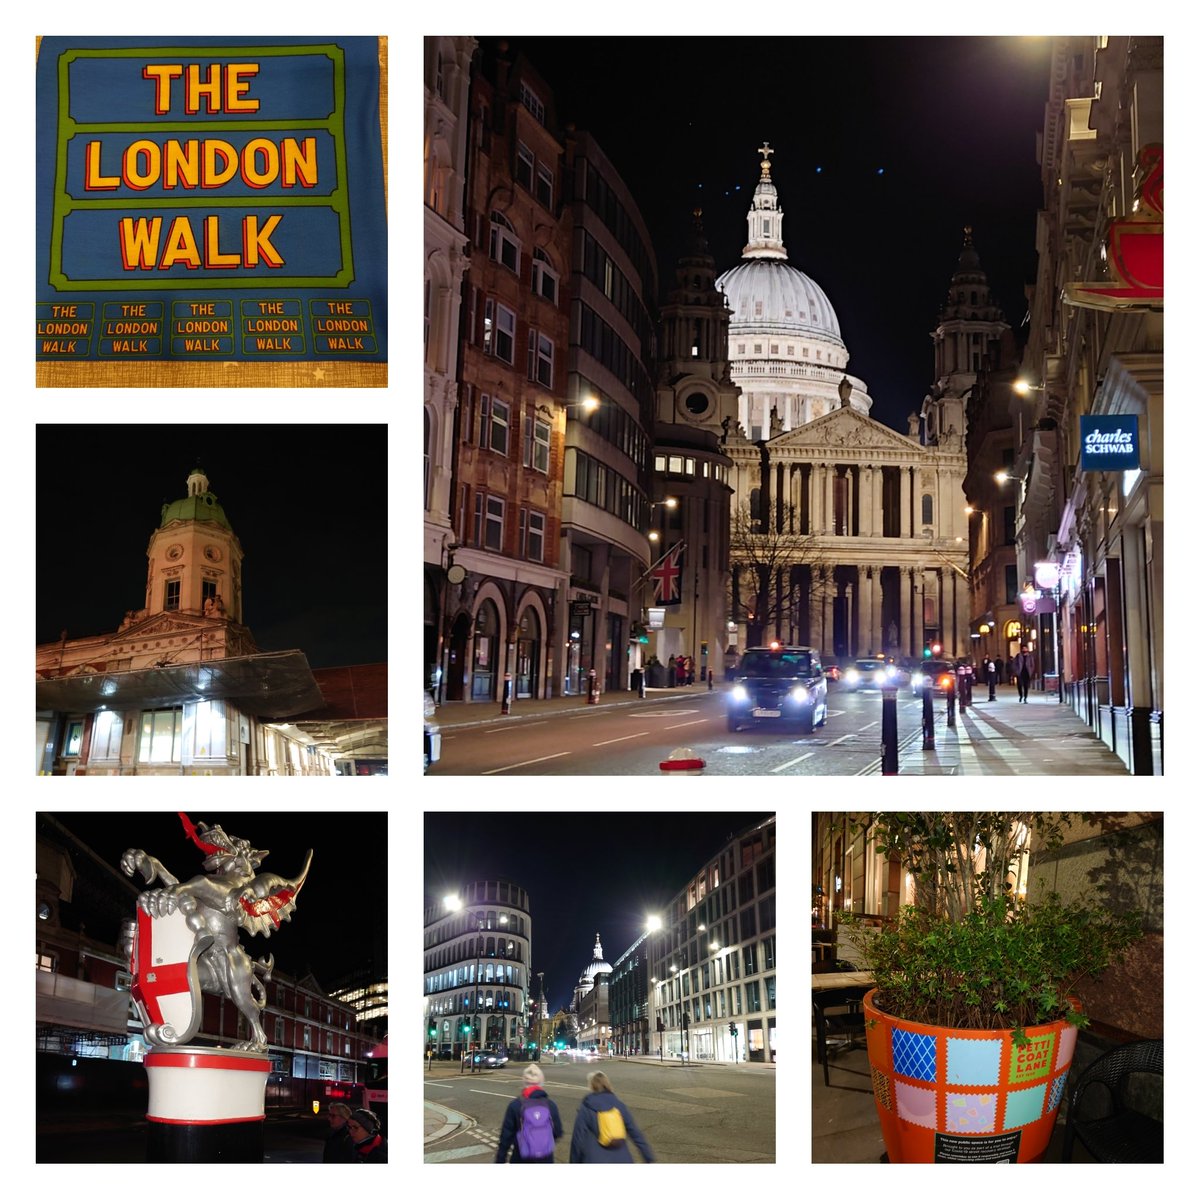 Last night the @TheQNI undertook #TheLondonWalk . It was cold & dark but the streets of London are magical at night when walking around. However to sleep on the streets is totally different & we are raising funds to help change lives #Homeless #InclusionHealth @CrystalOldman